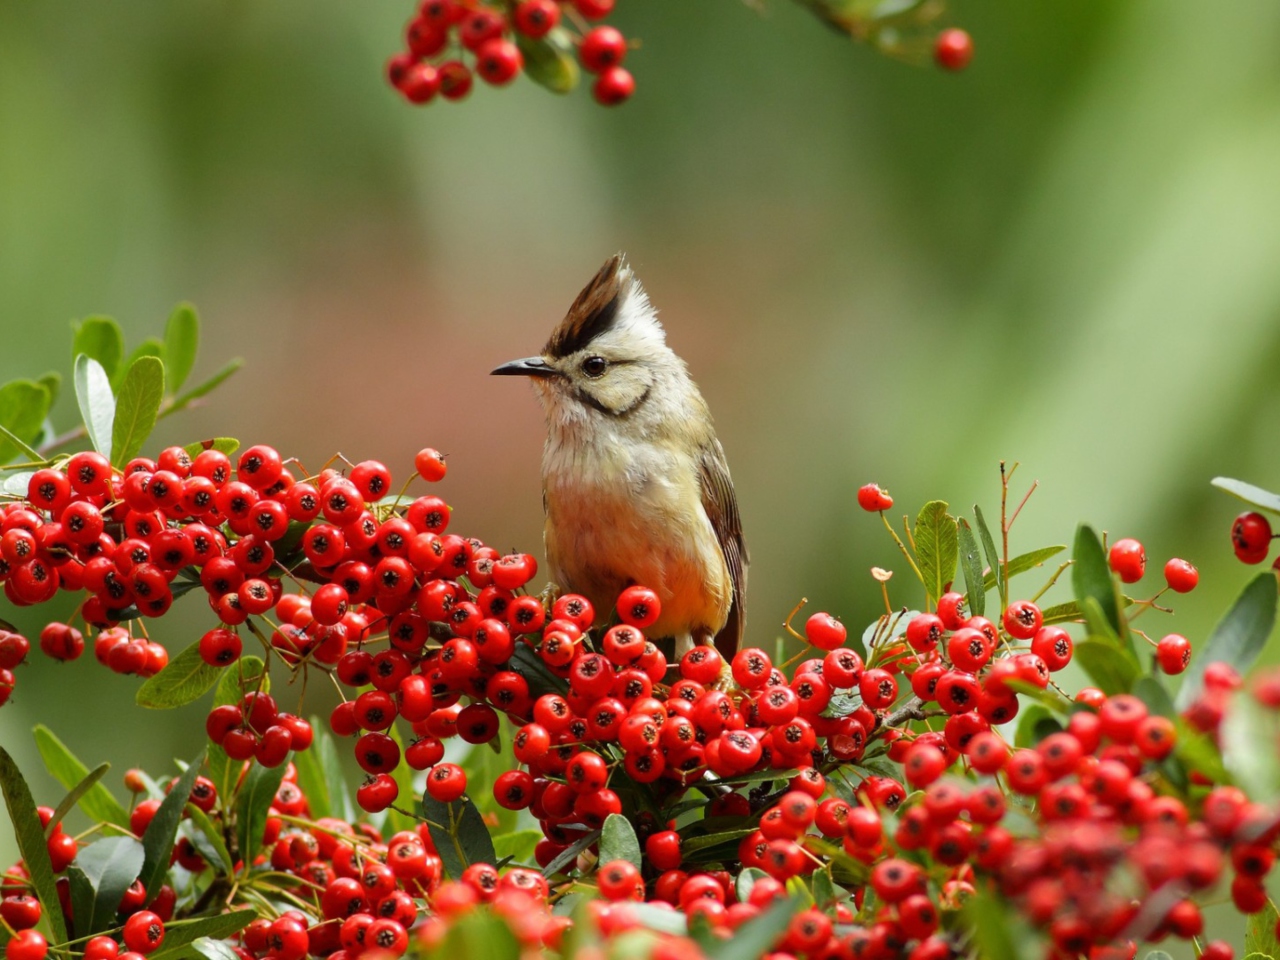 Bird On Branch With Red Berries wallpaper 1280x960